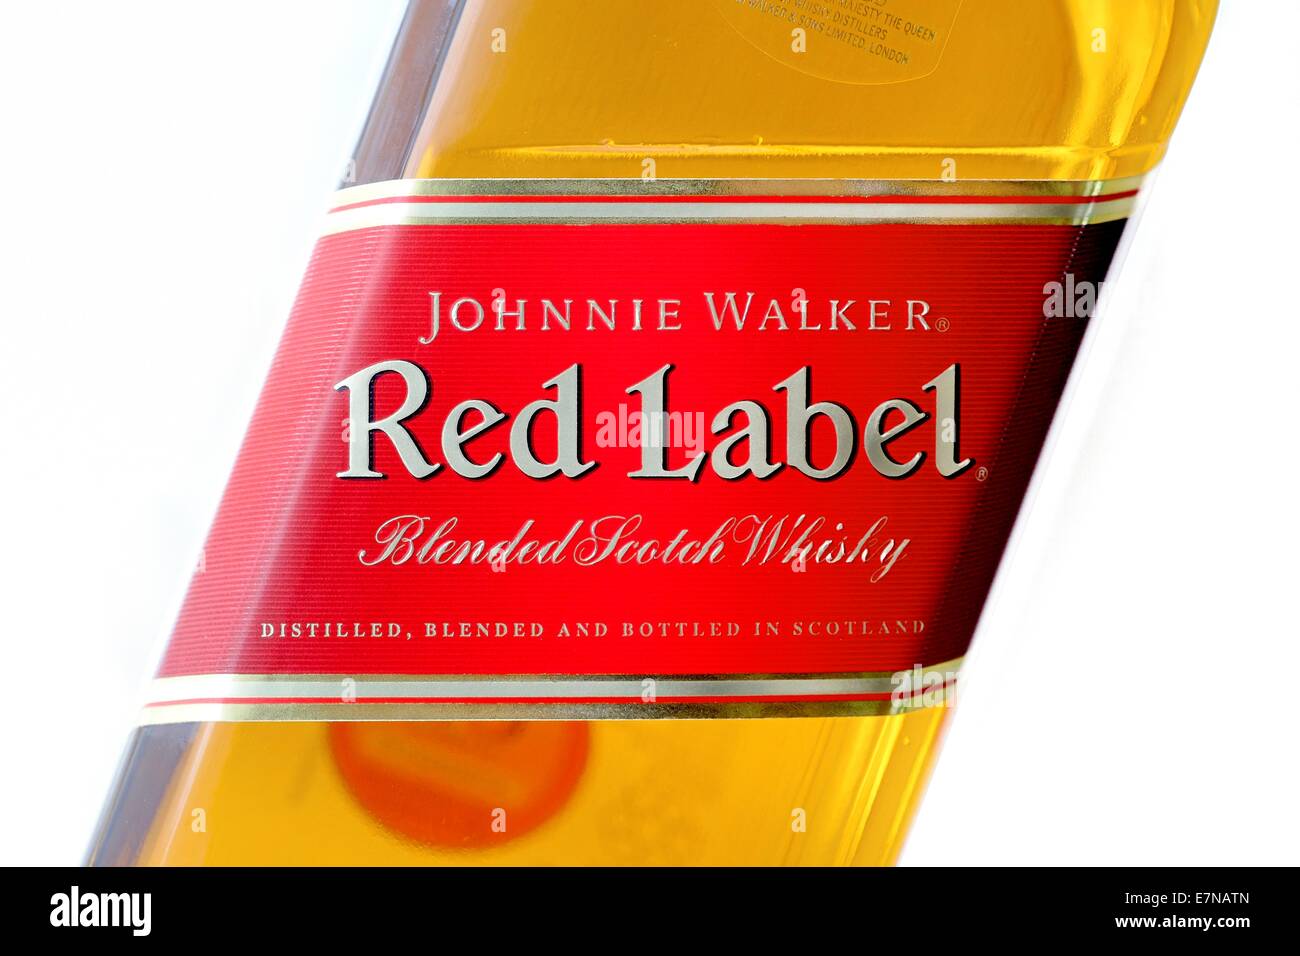 Johnnie walker red label blended scotch whisky Stock Photo - Alamy